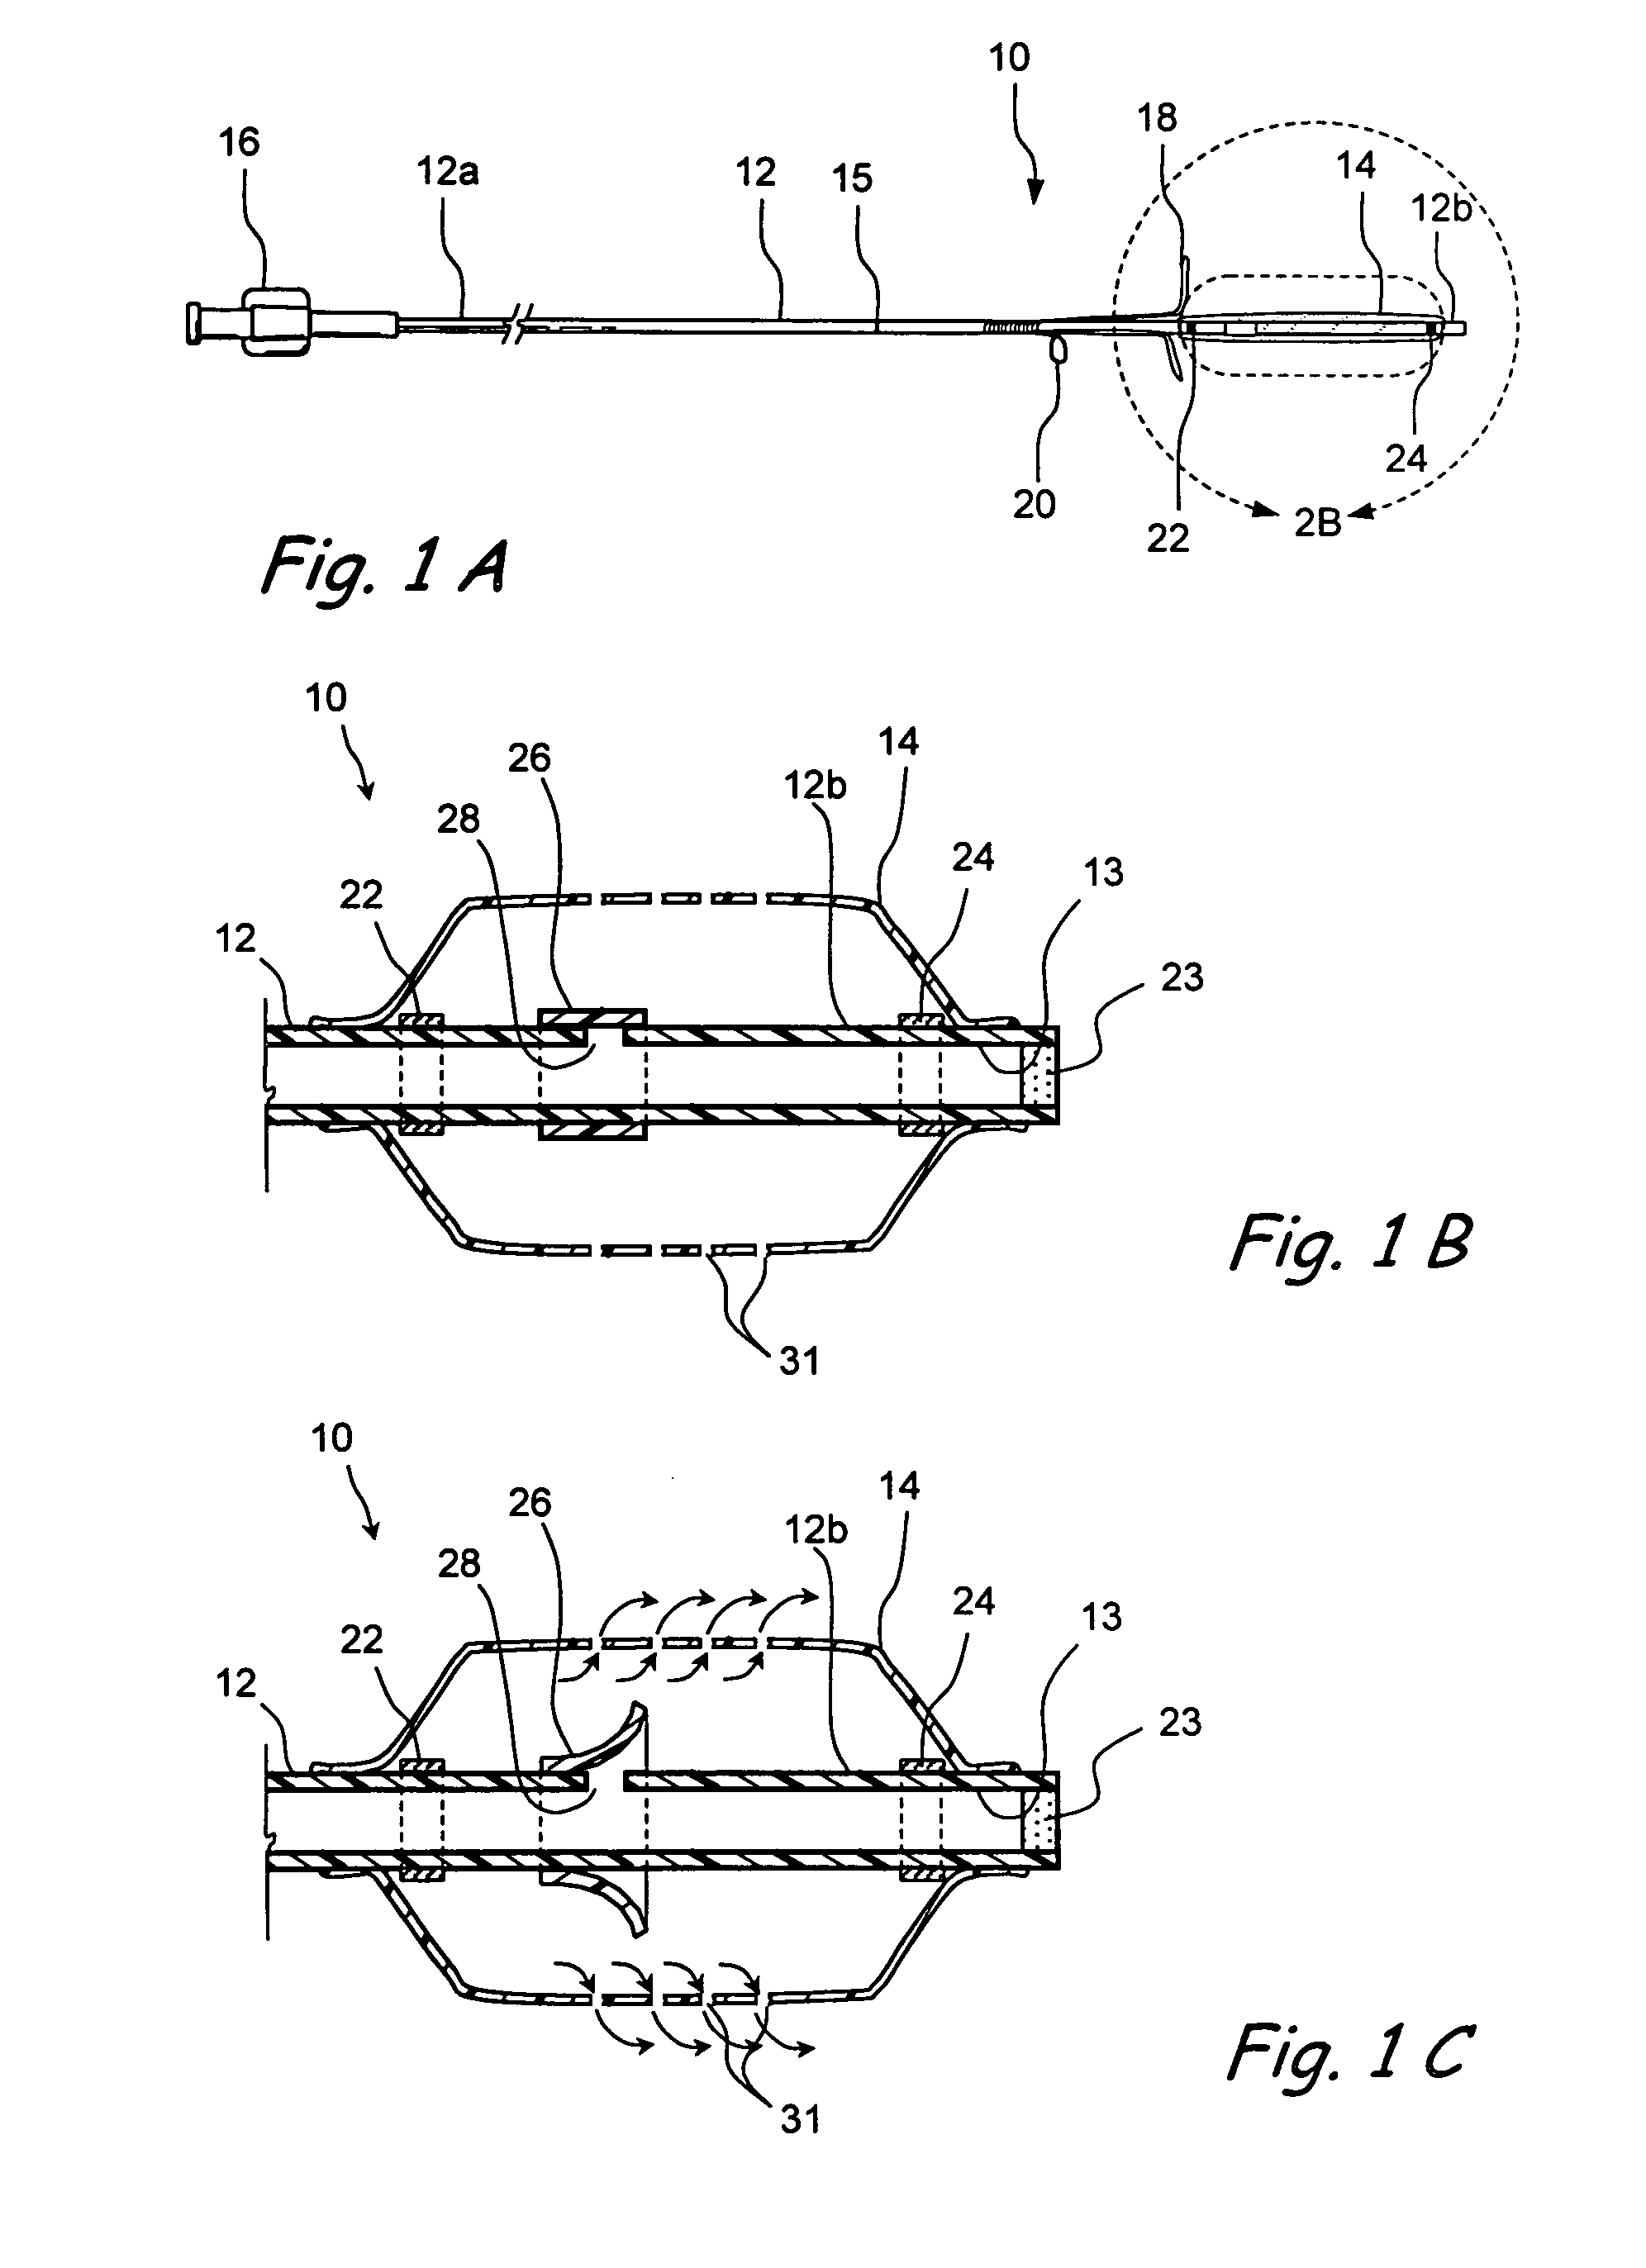 Implantable devices and methods for treating sinusitis and other disorders